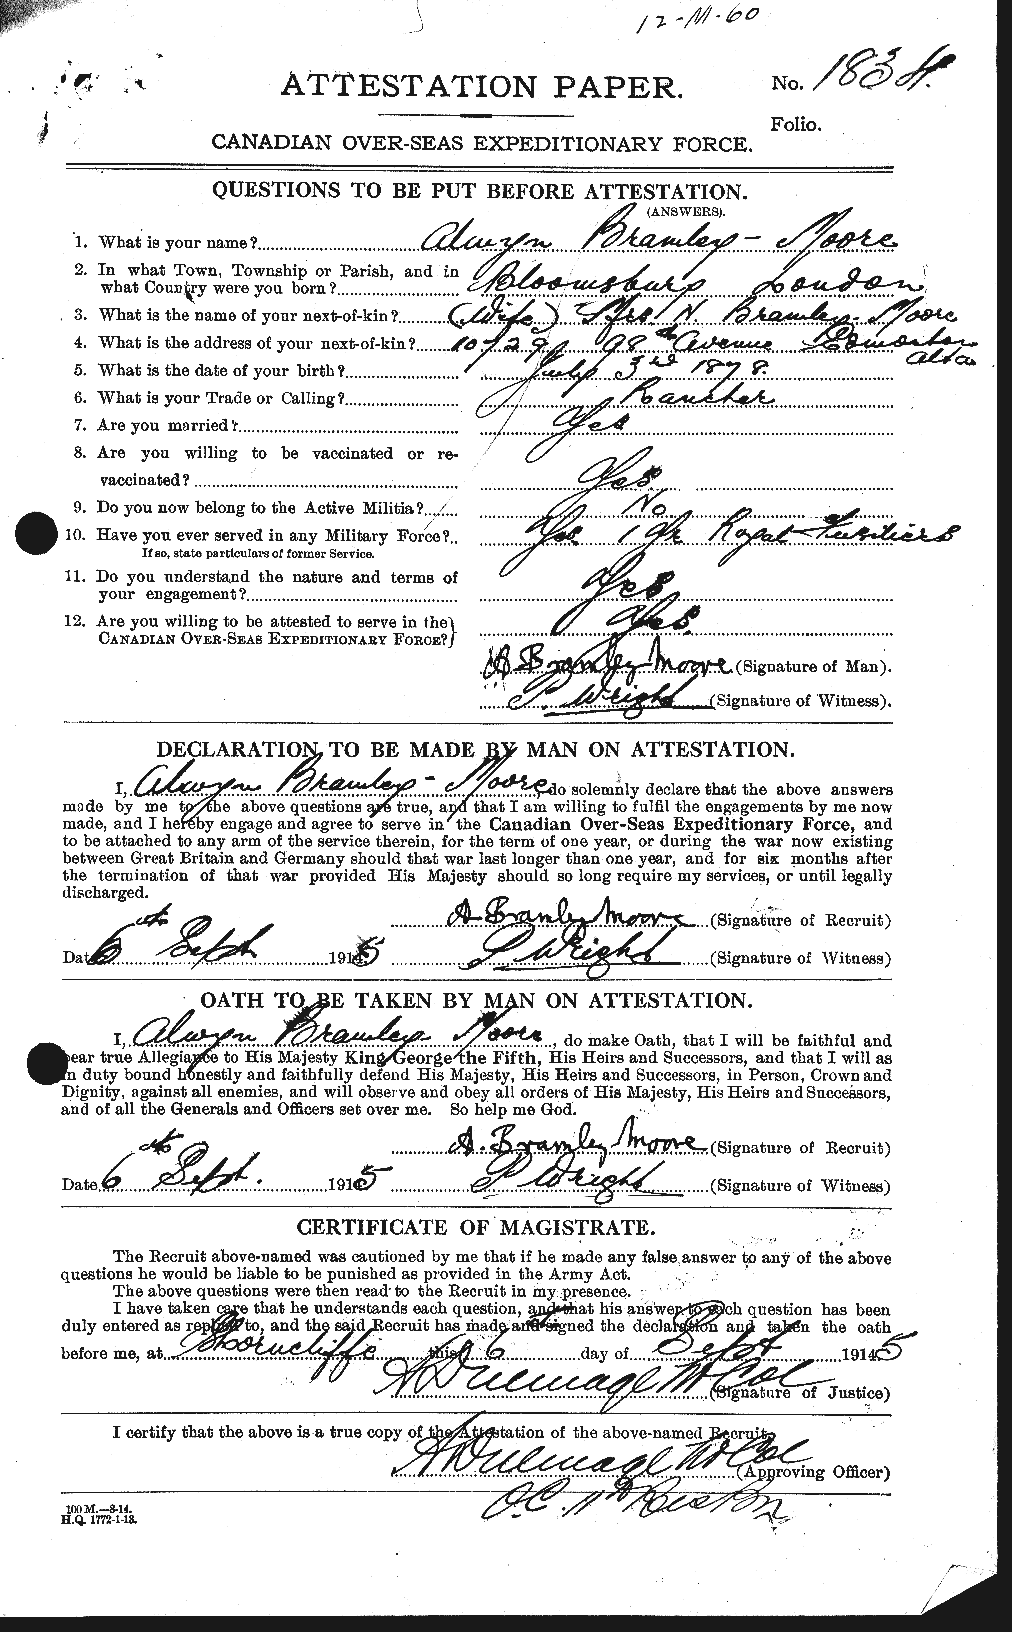 Personnel Records of the First World War - CEF 259616a